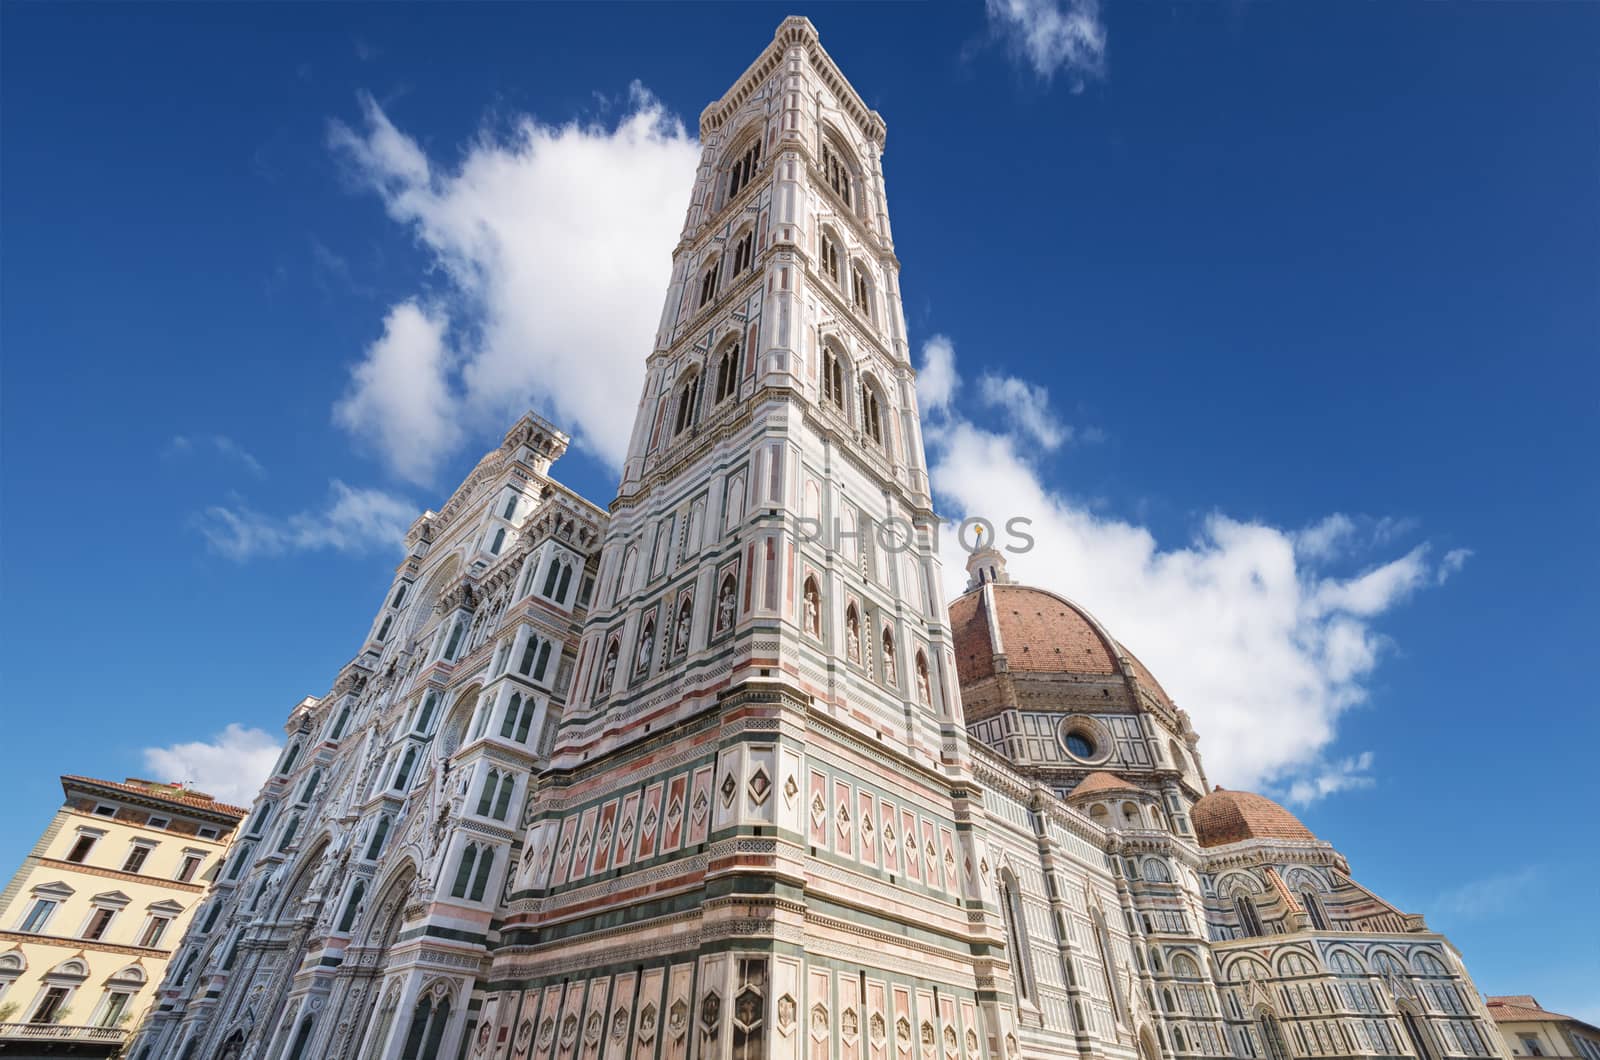 facade of famous Florence cathedral, Santa Maria del Fiore.